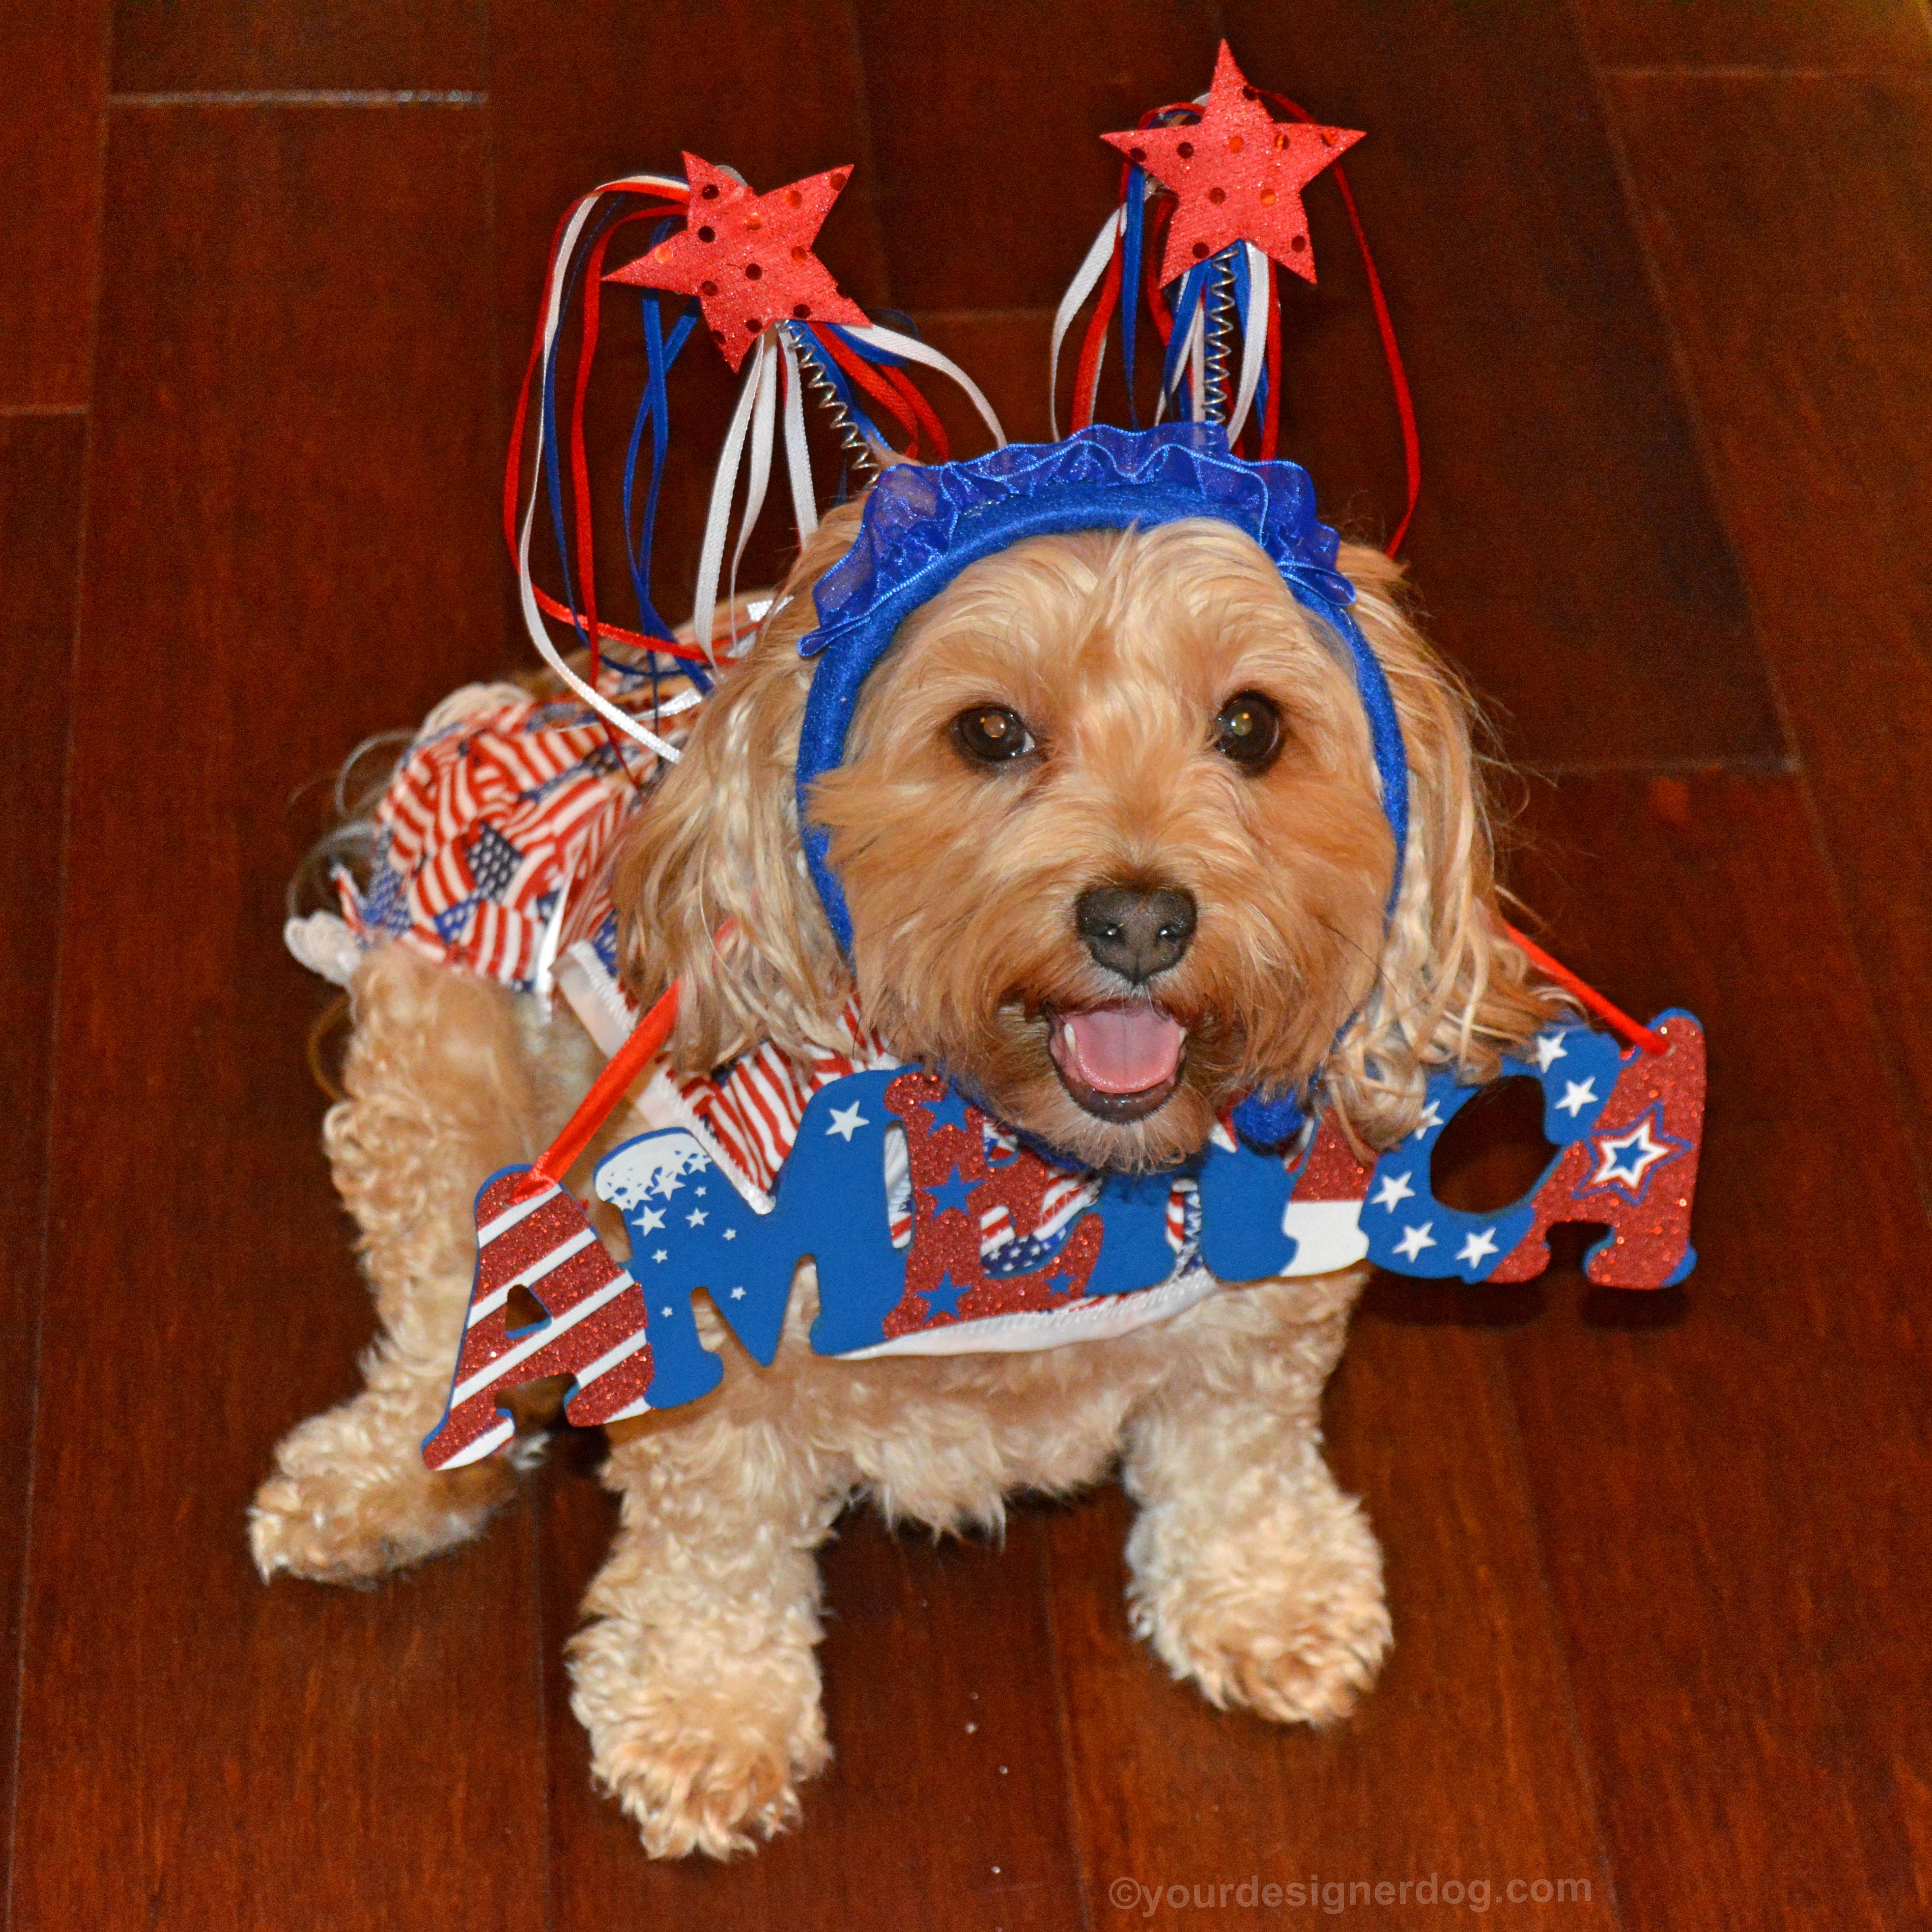 dogs, designer dogs, yorkipoo, yorkie poo, america, fourth of july, independence day